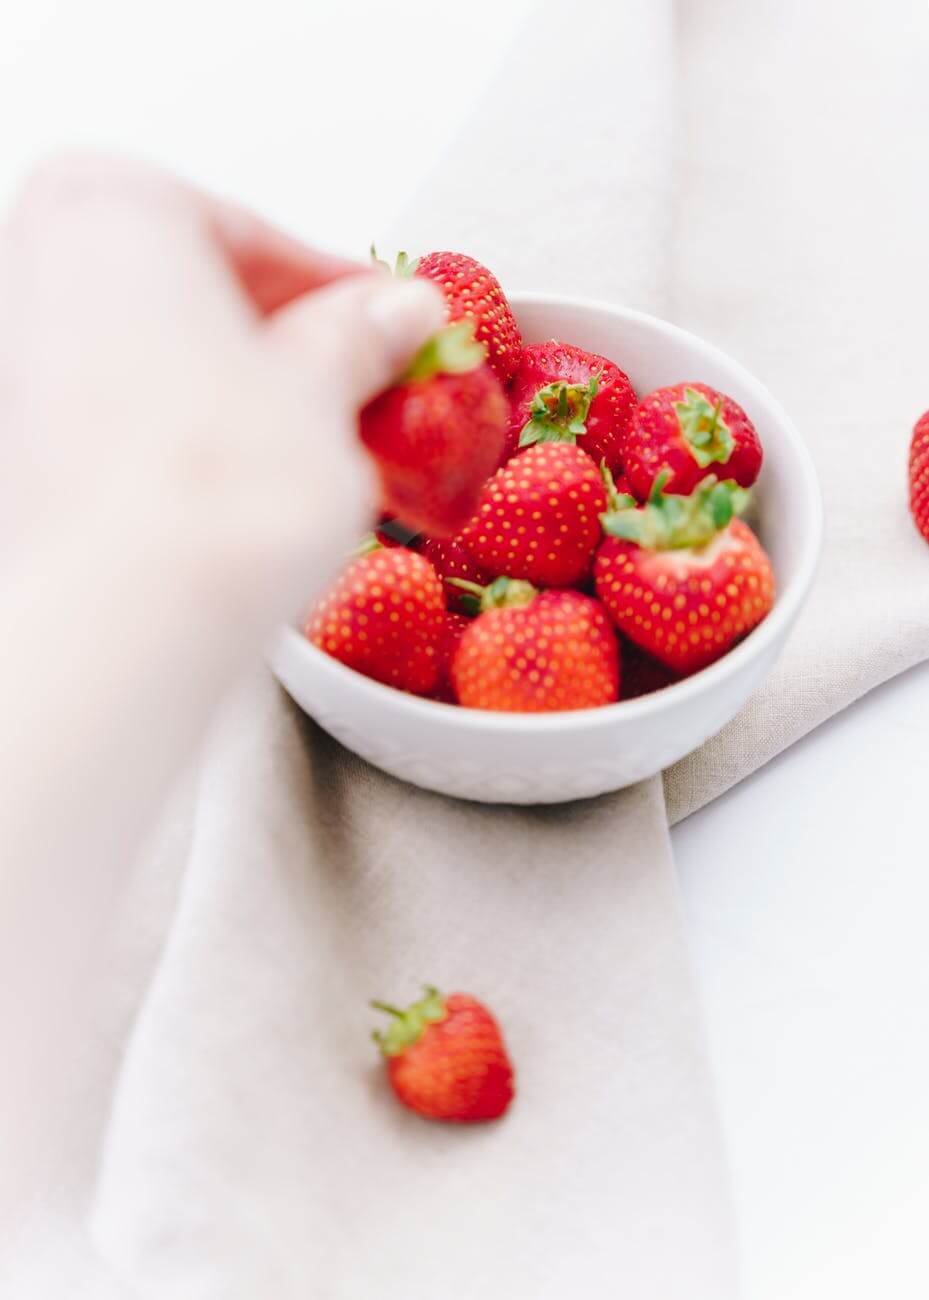 strawberries in plate on white surface